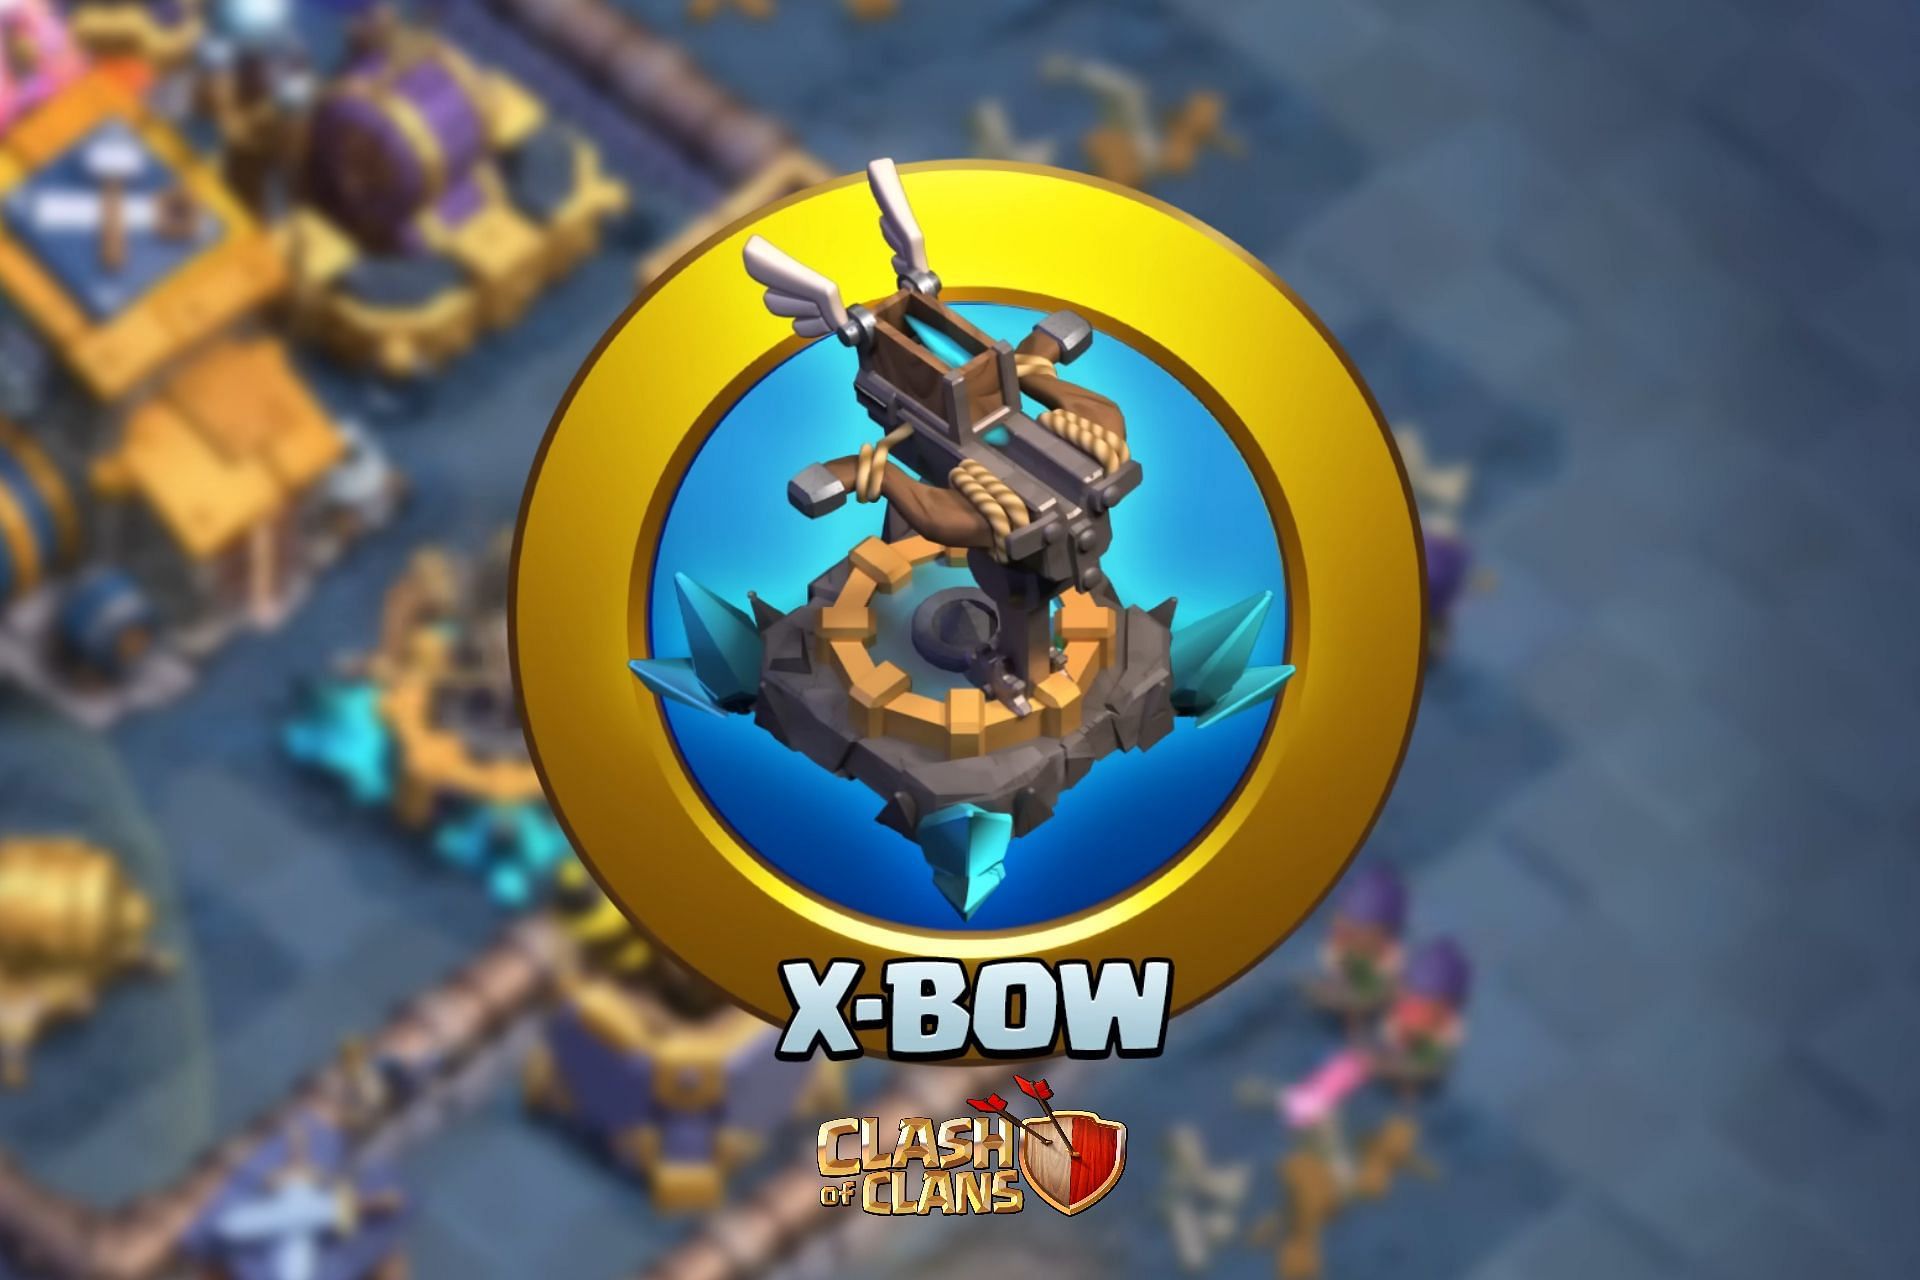 Builder Hall 10 X-Bow in Clash of Clans (Image via Supercell)